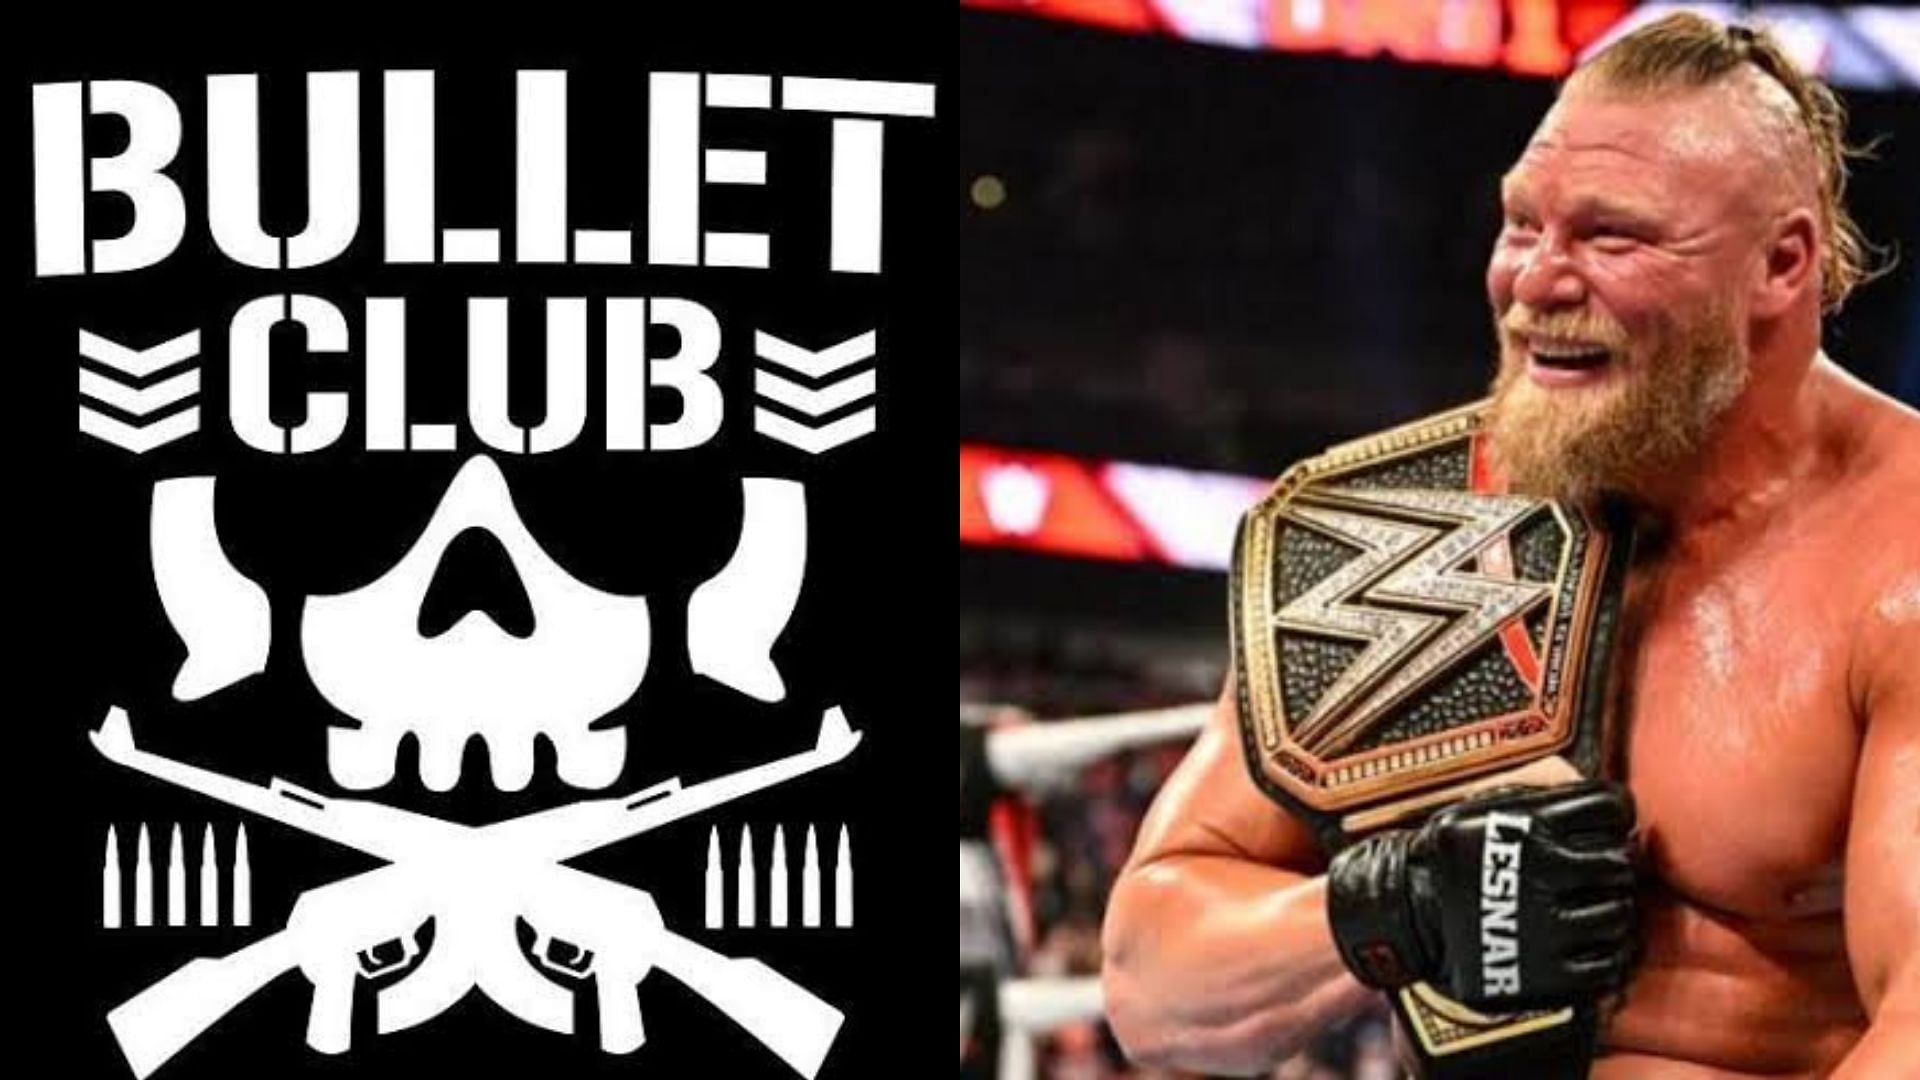 Bullet Club&#039;s Chris Bey responded to a quote from Brock Lesnar